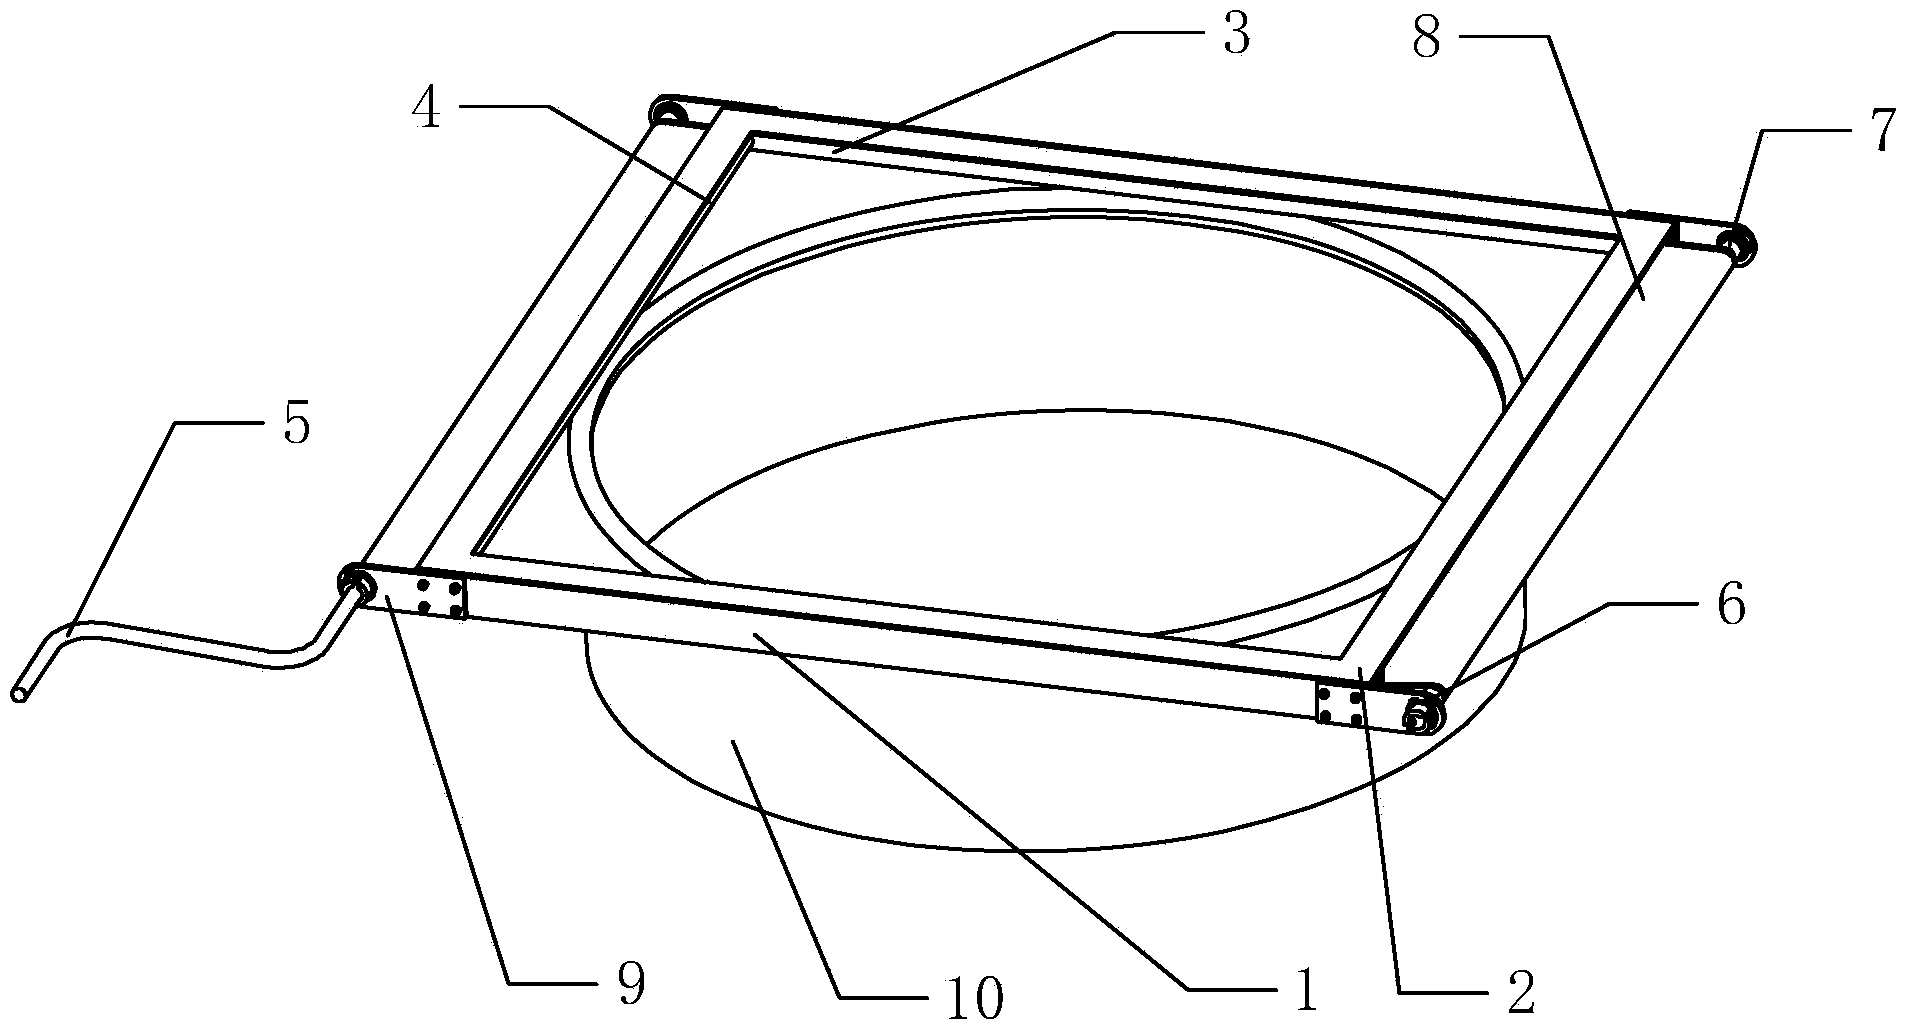 Shutter-type protective device used for primary lens cone of telescope